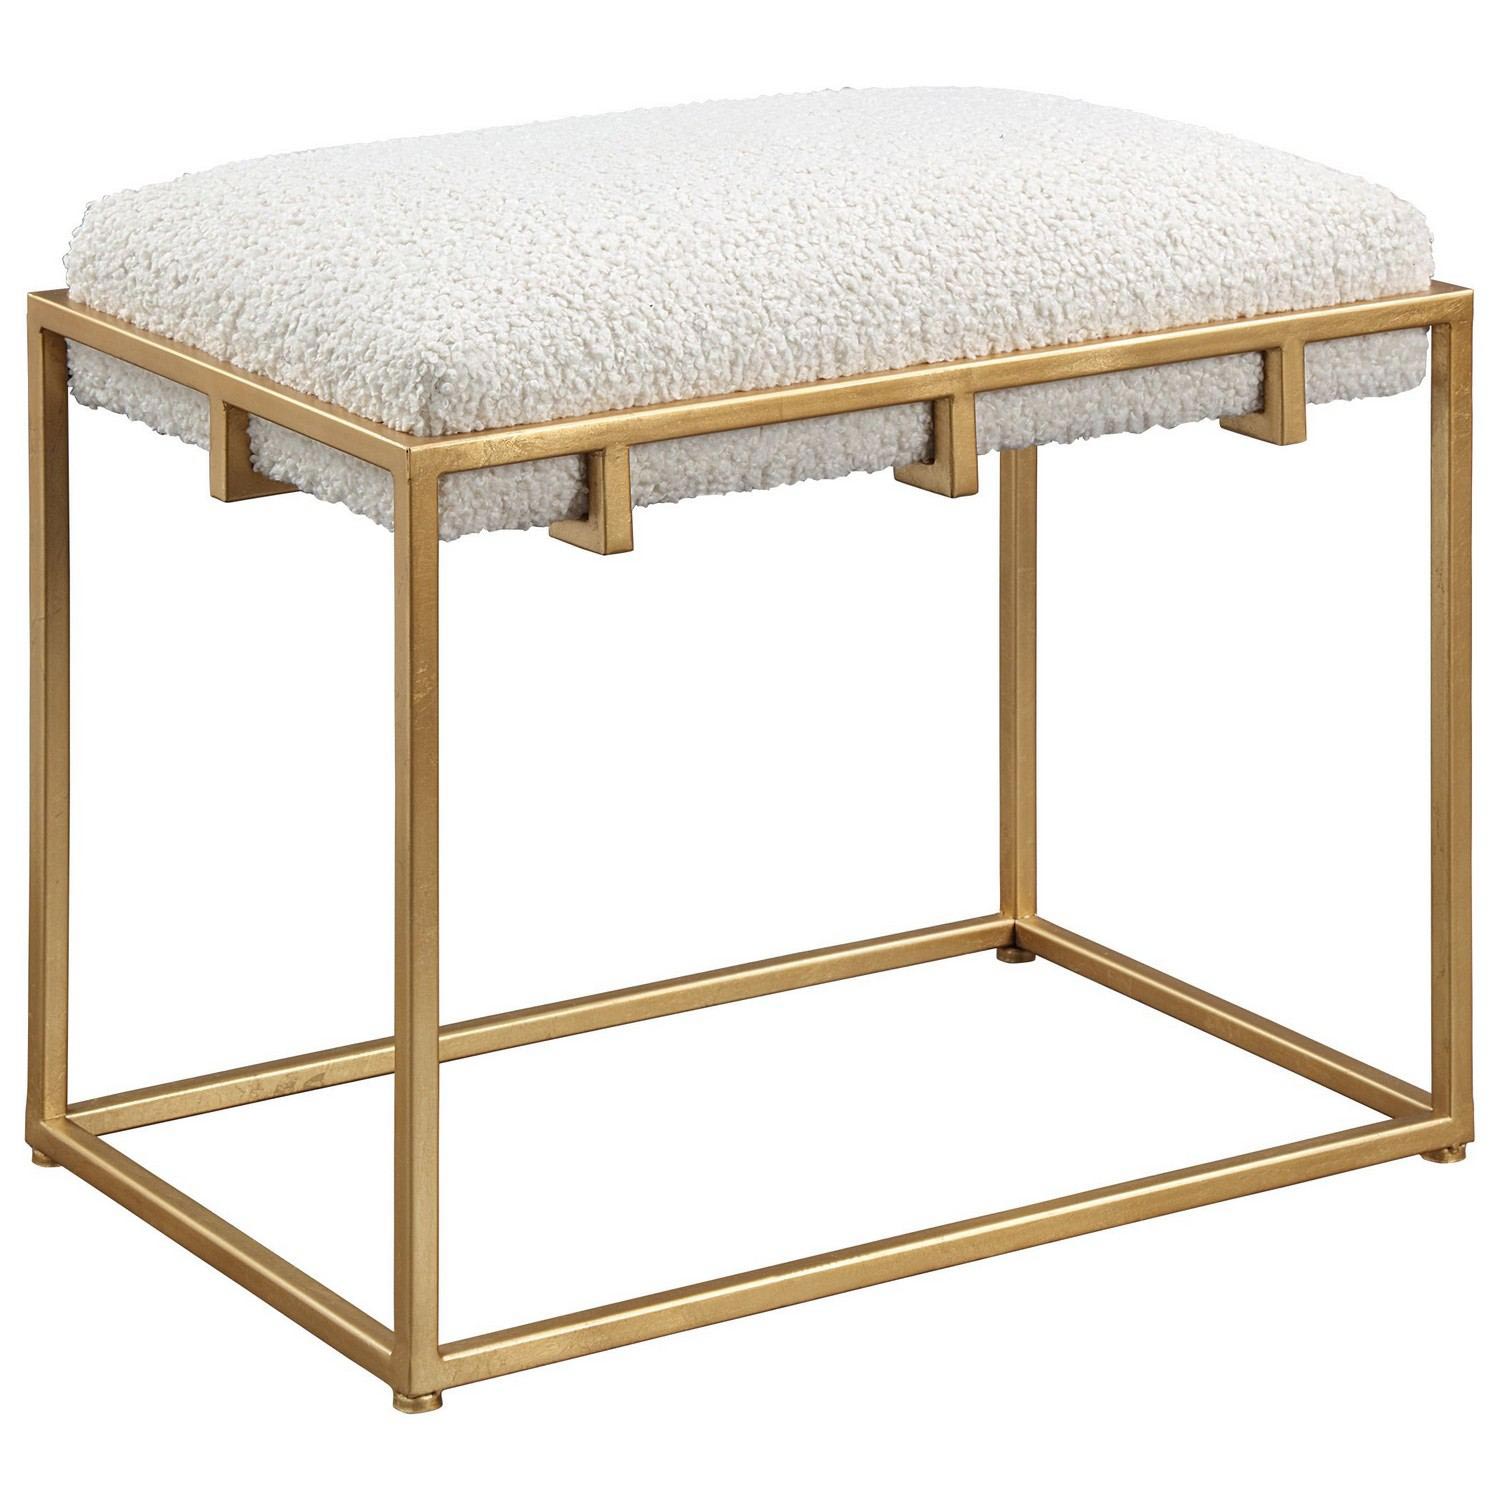 Uttermost Paradox Small Shearling Bench - Gold/White